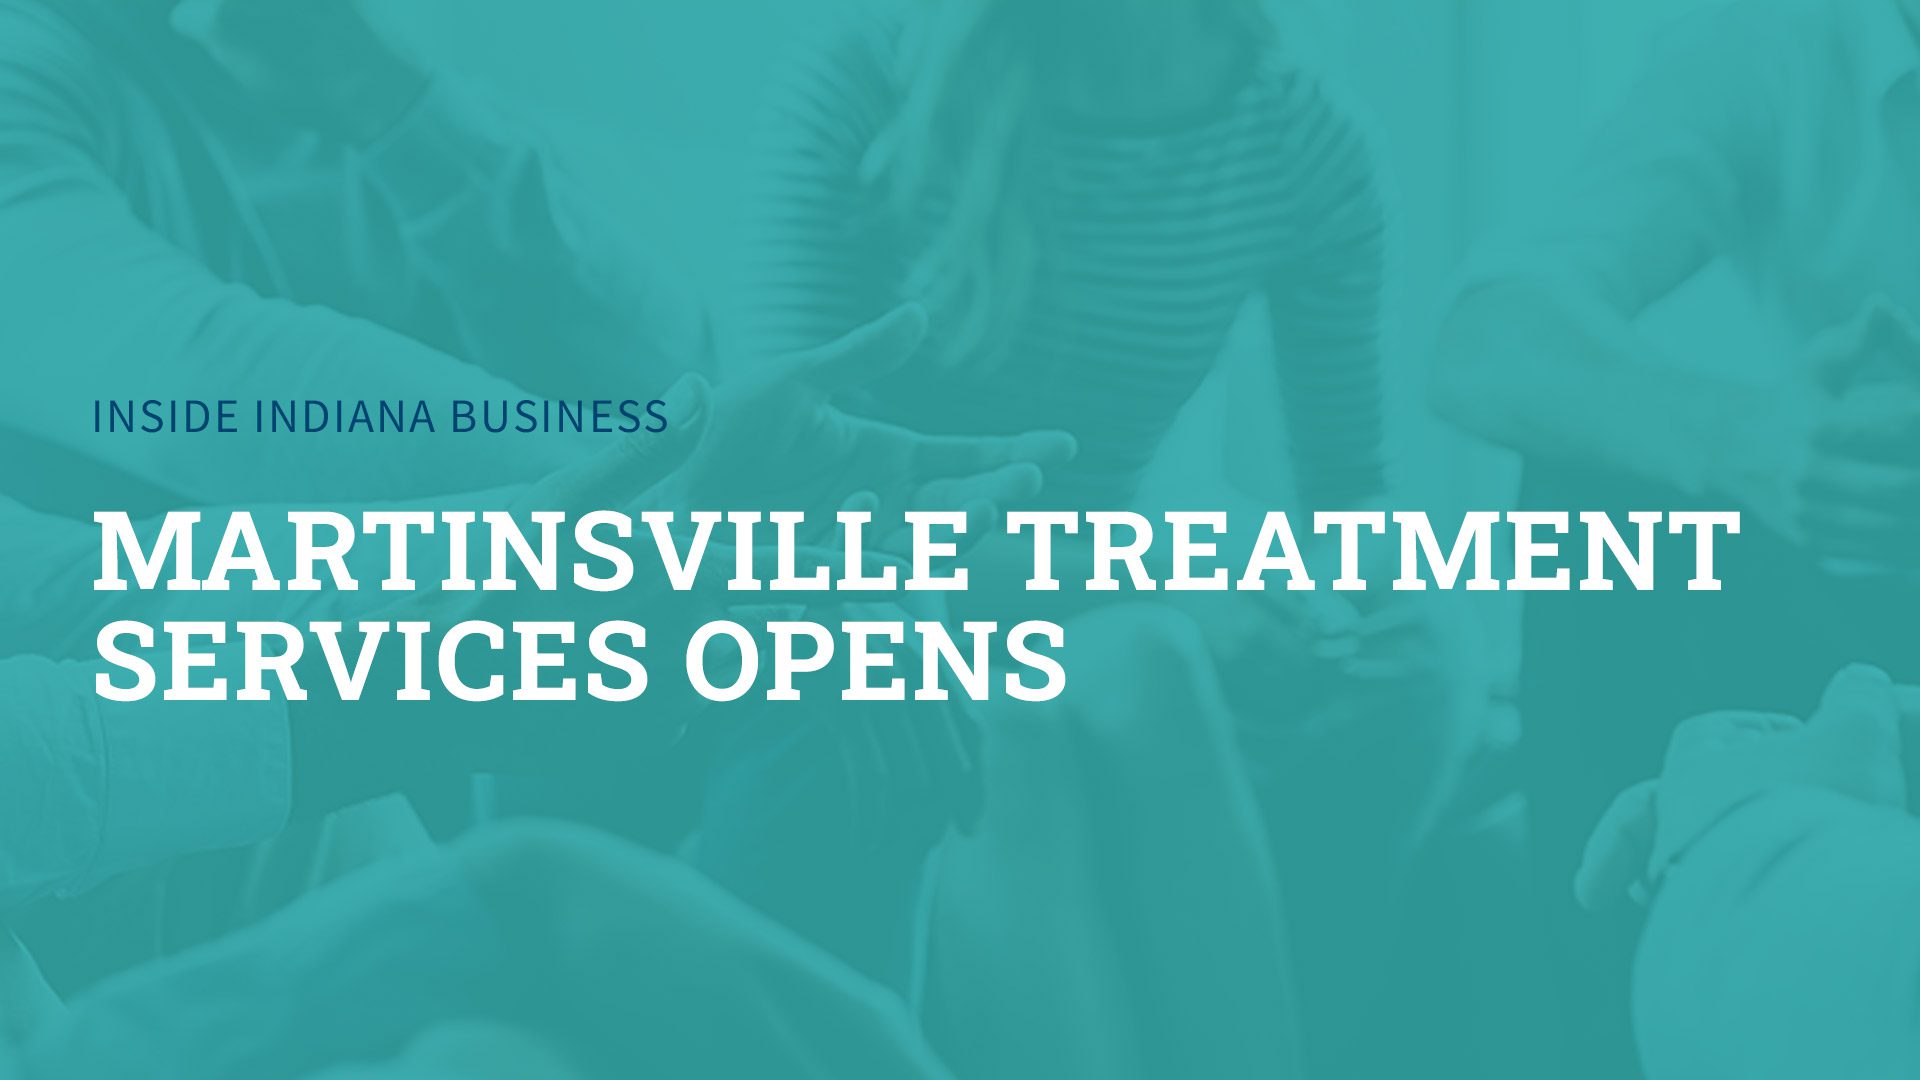 Martinsville Treatment Services Opens